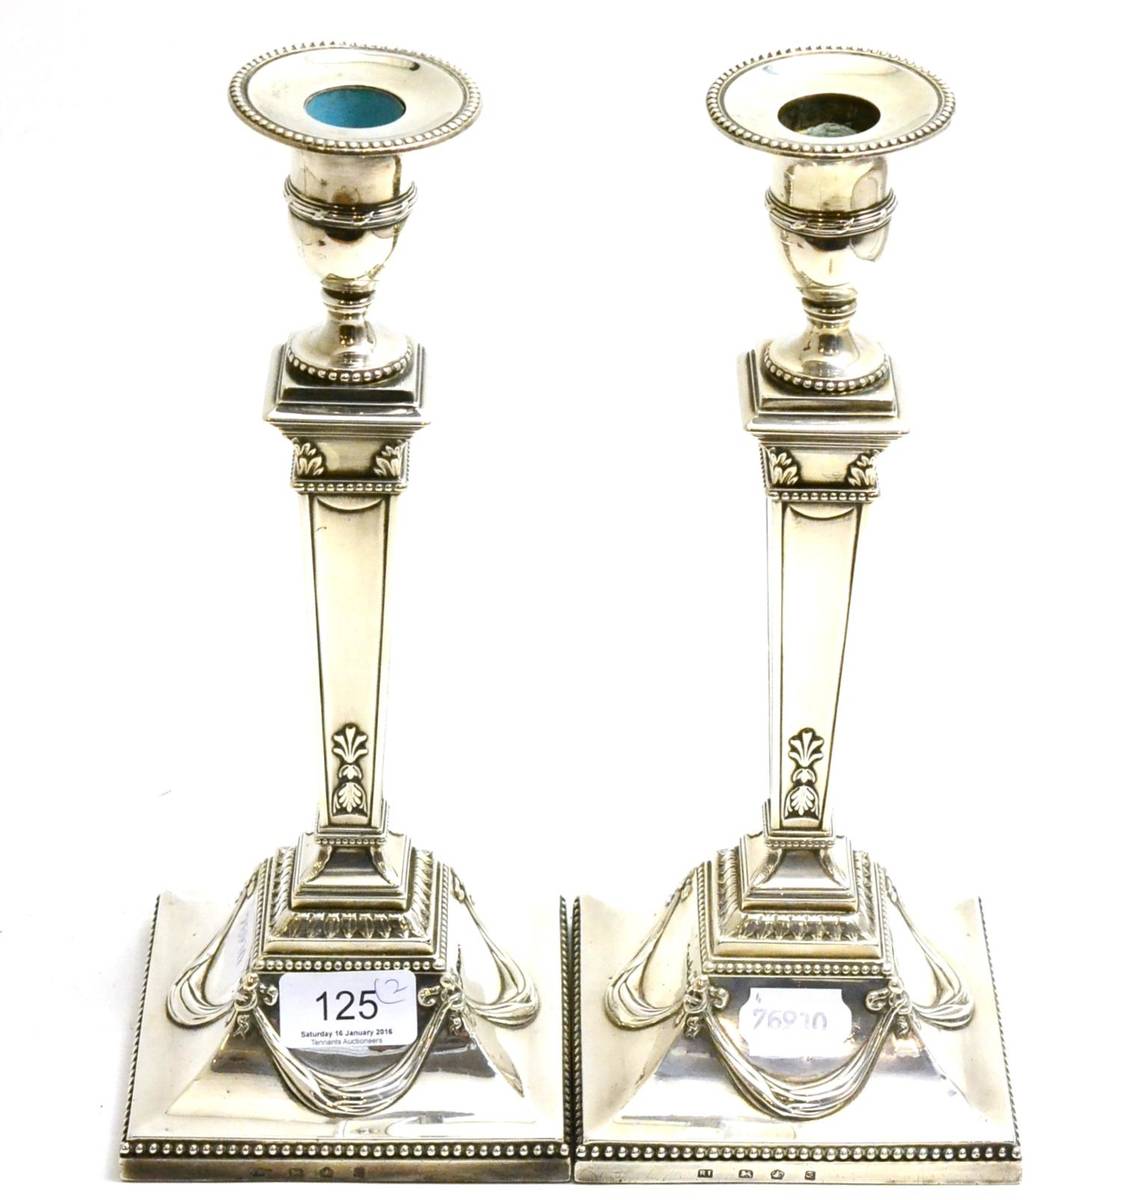 Lot 125 - A pair of George III neo classical silver candlesticks, Sheffield 1778, with removable nozzles (2)